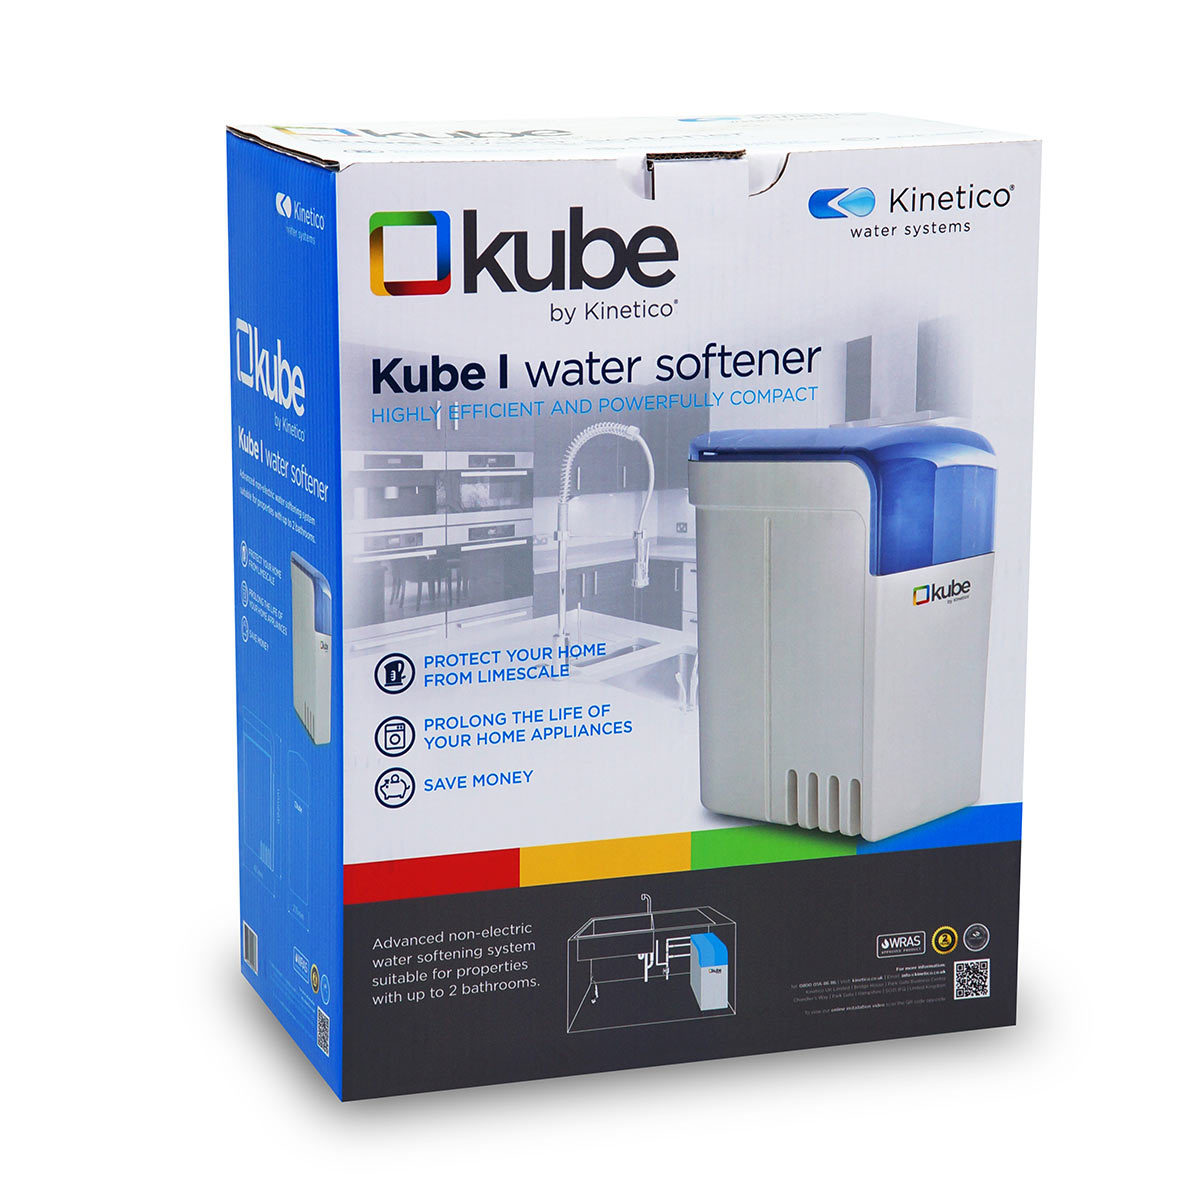 Kinetico Kube 1 Non-Electric Water Softener - For Households with up to 2 Bathrooms